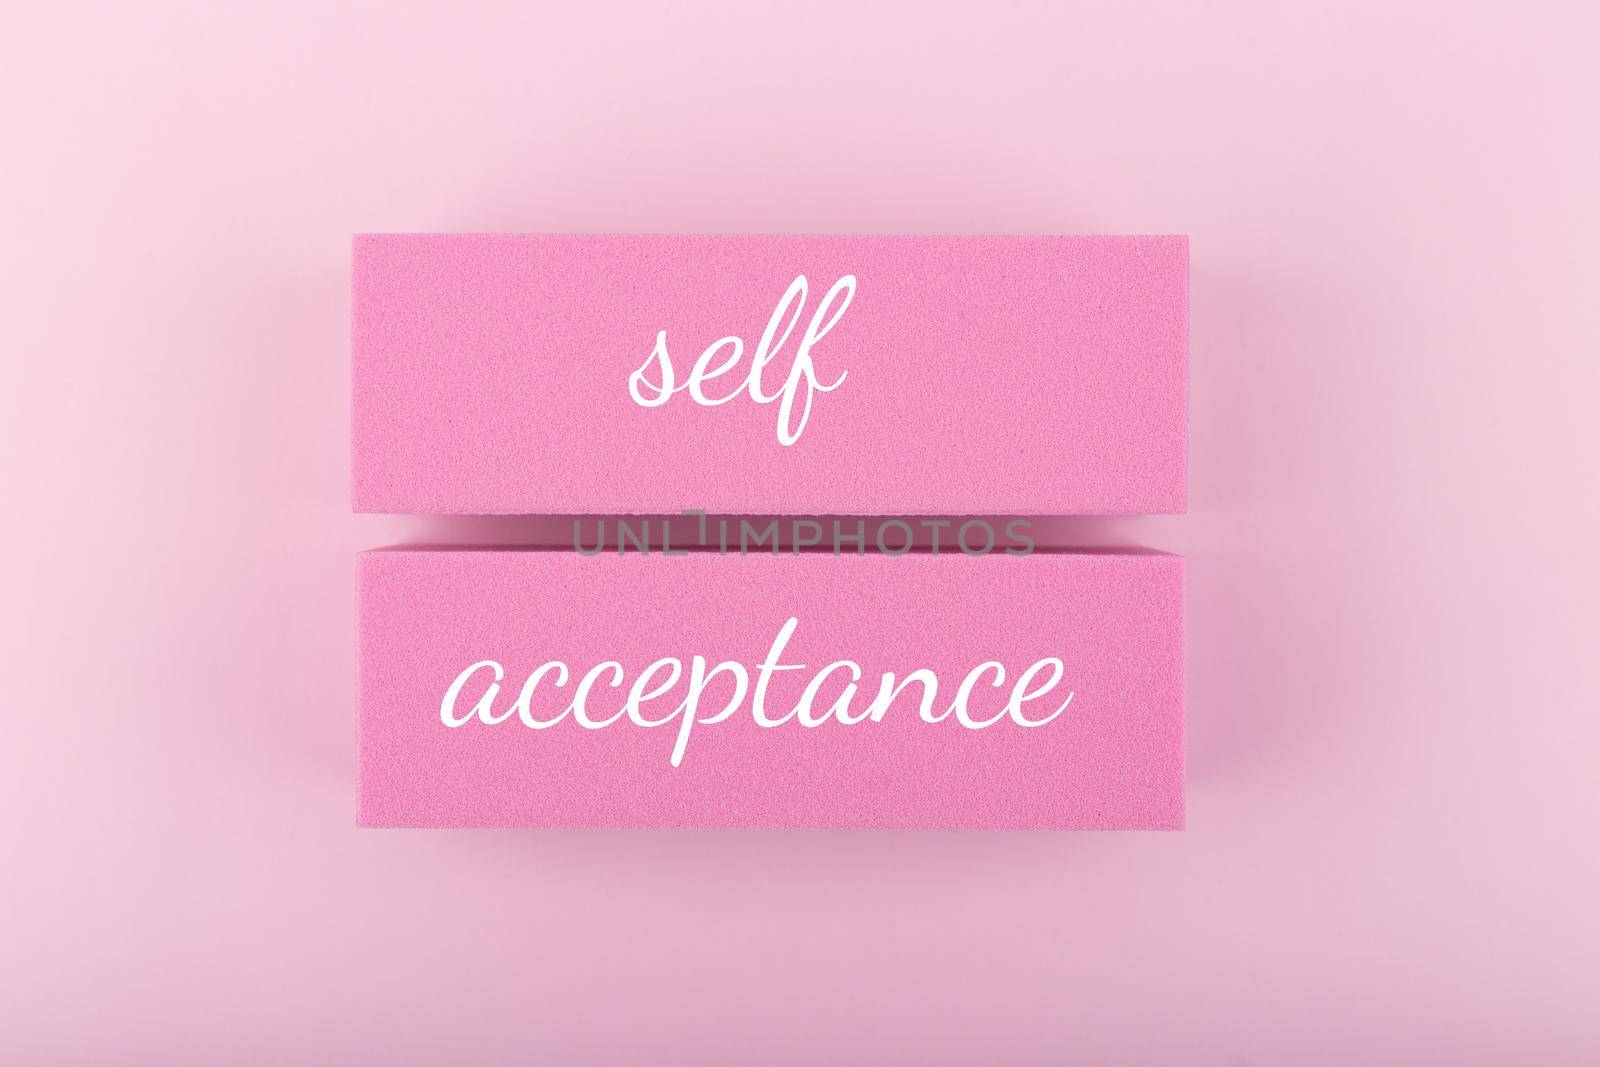 Self acceptance minimal creative concept in pink colors against pink background. by Senorina_Irina